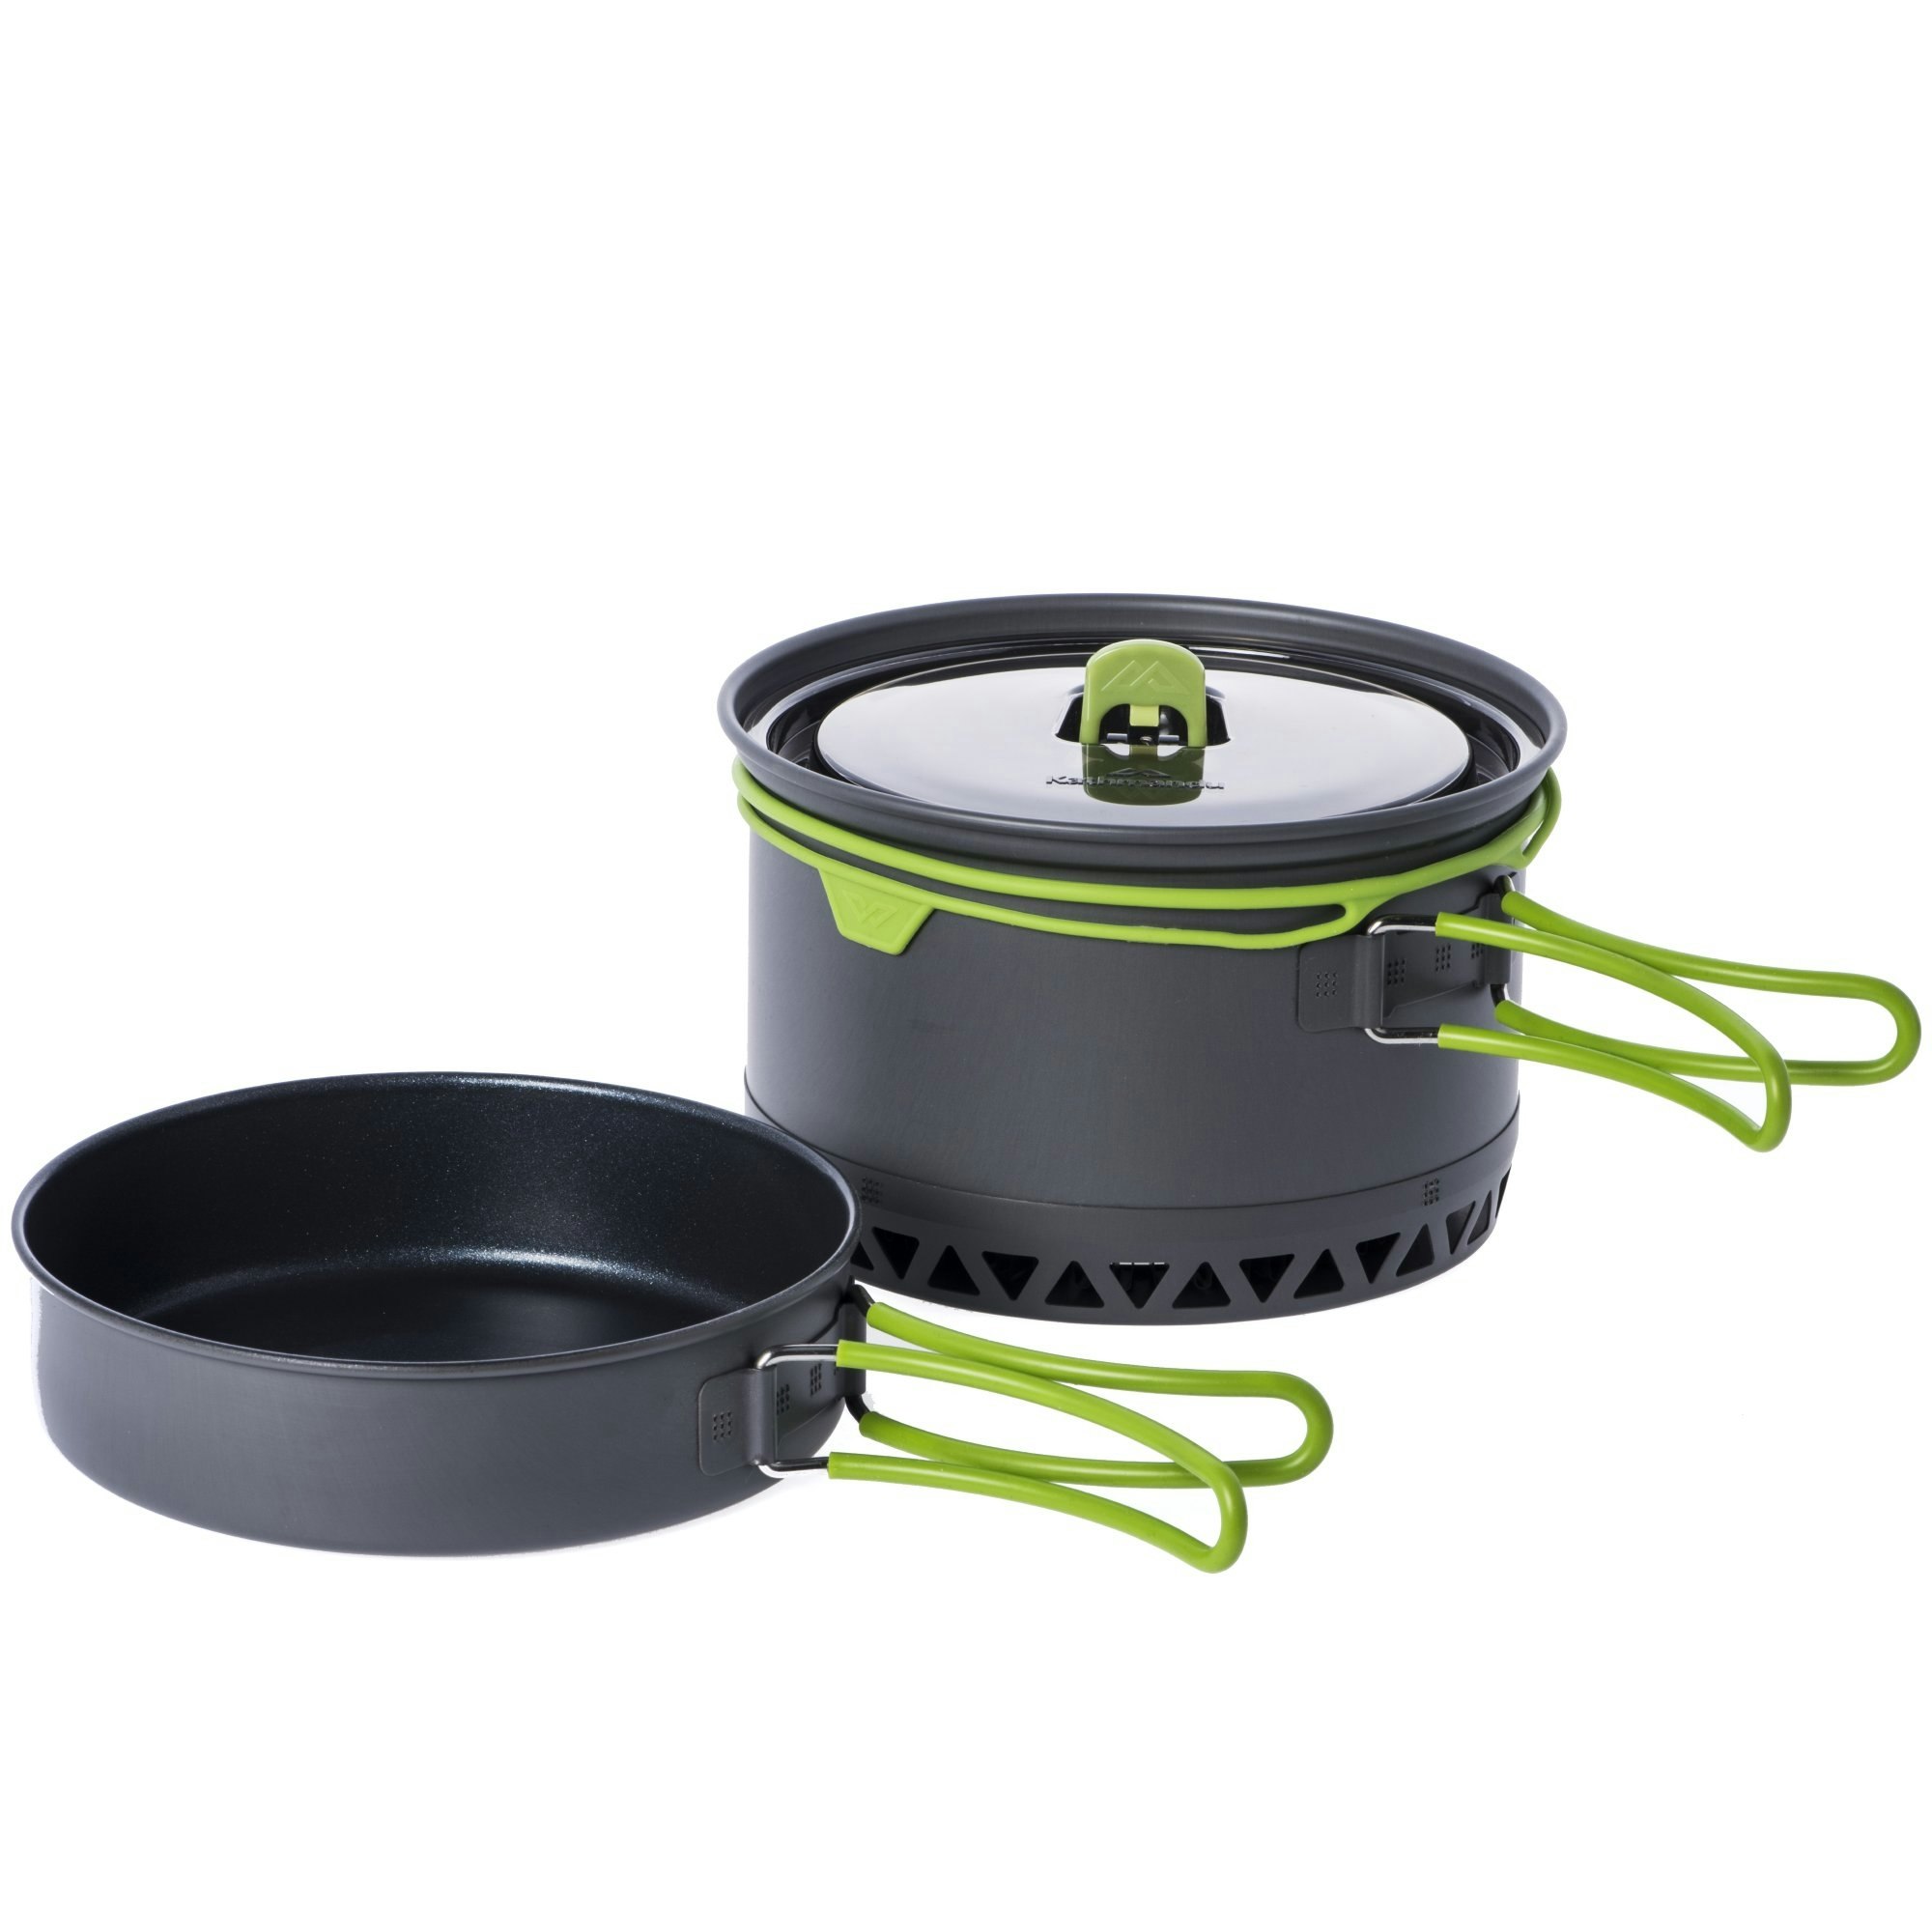 NEW Kathmandu Ascent Outdoor Hiking Camping Backpacking Cookware Pot and Fry 9419788766748 eBay